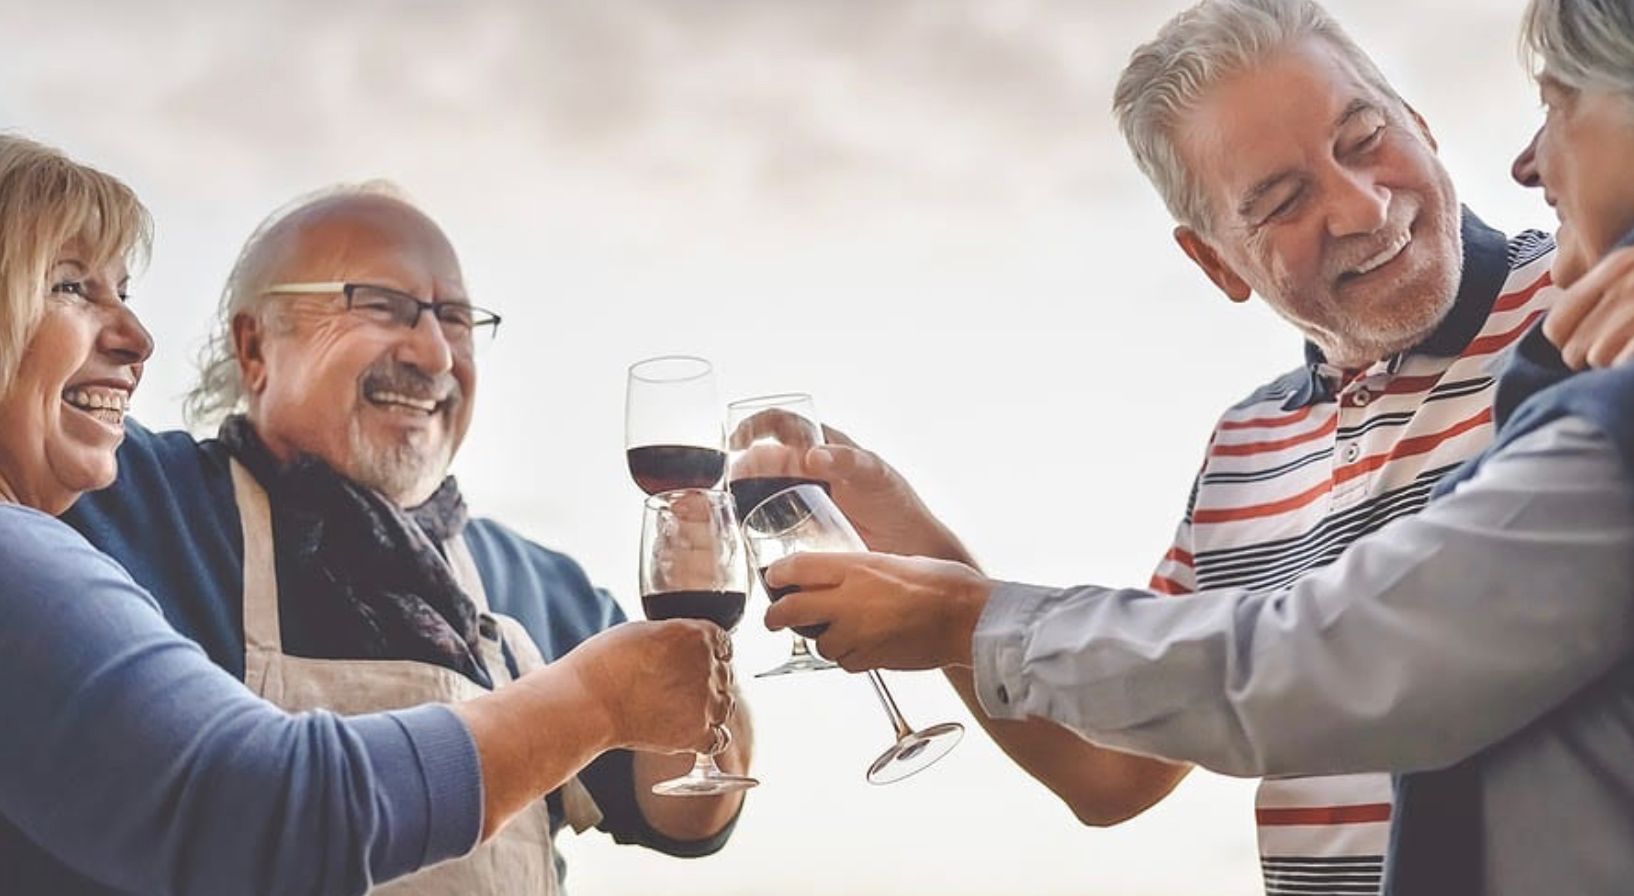 Daniel Hooper: Does wine have an old people problem?